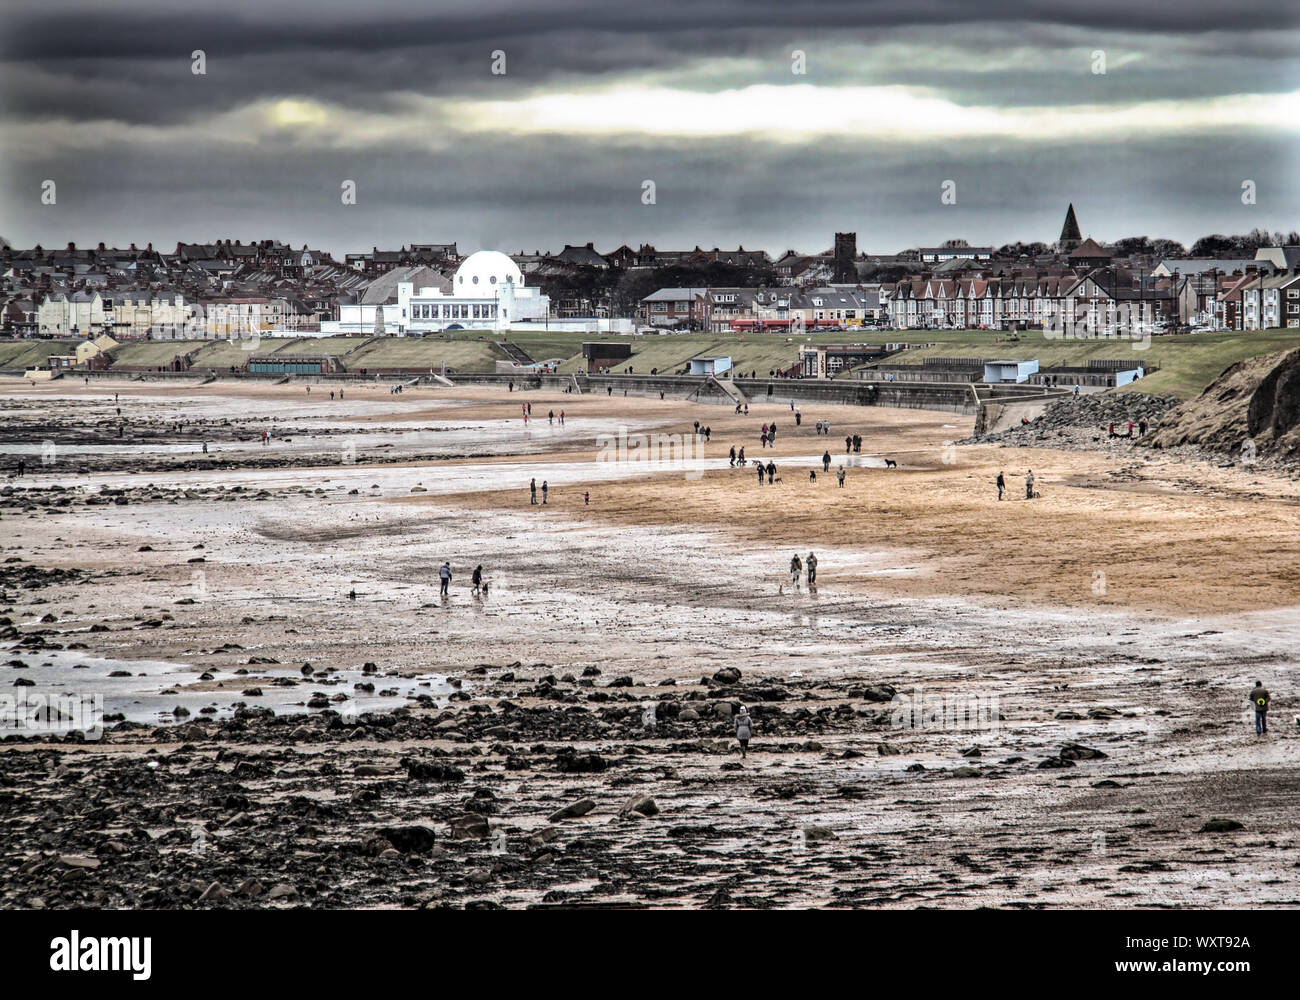 Strollers along the beach at Whitley Bay, in the north of England on a dreary winter afternoon with the white outline of the Spanish City illuminated Stock Photo